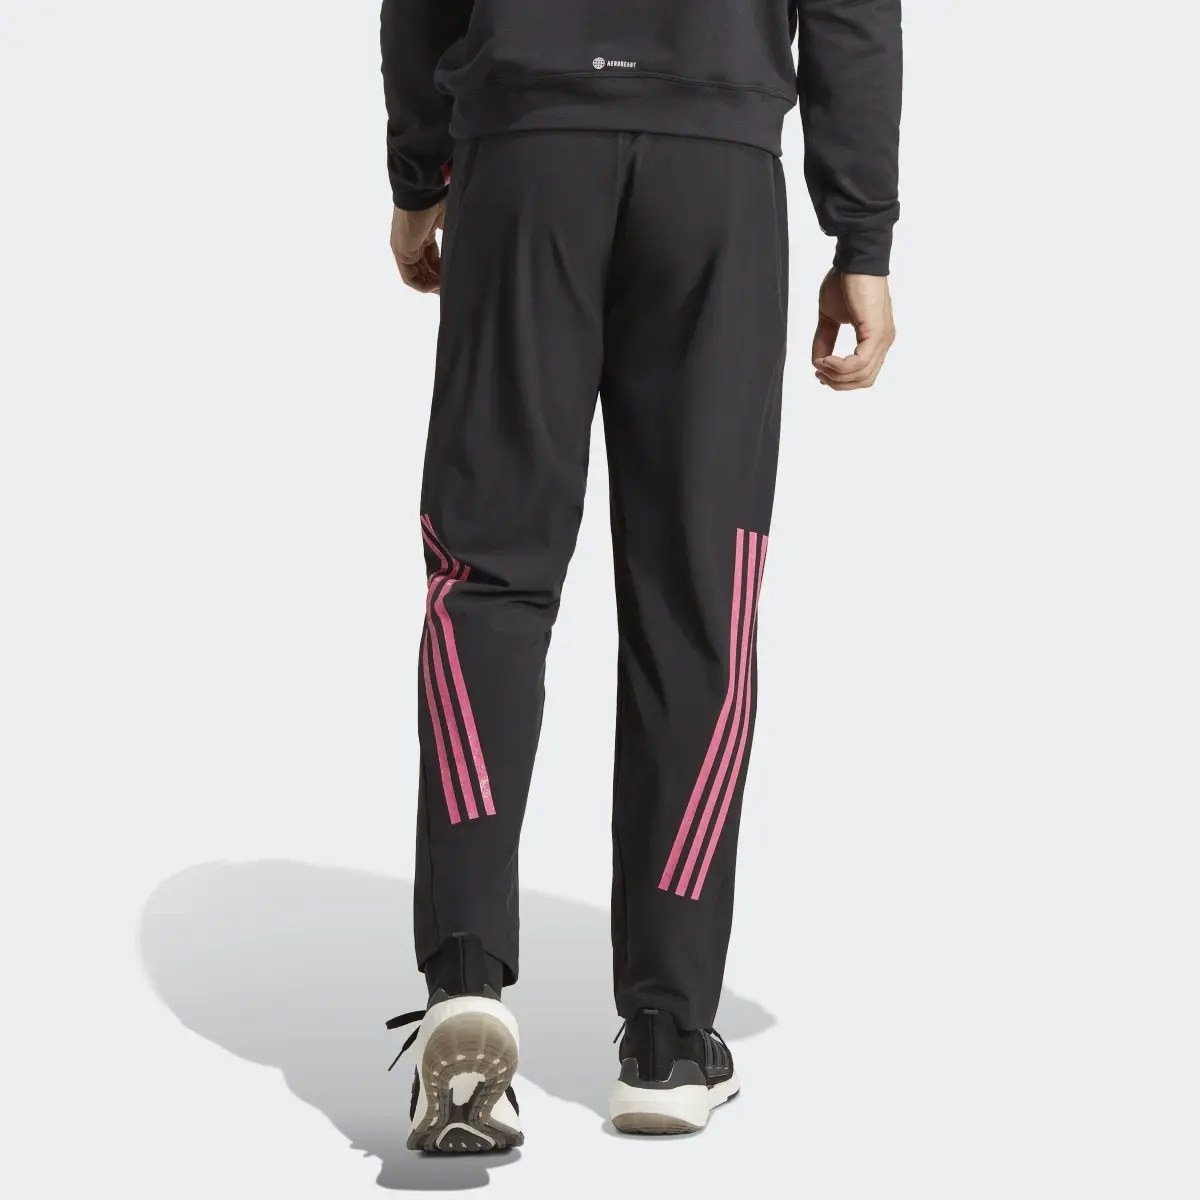 Adidas HIIT Pants Curated By Cody Rigsby. 2